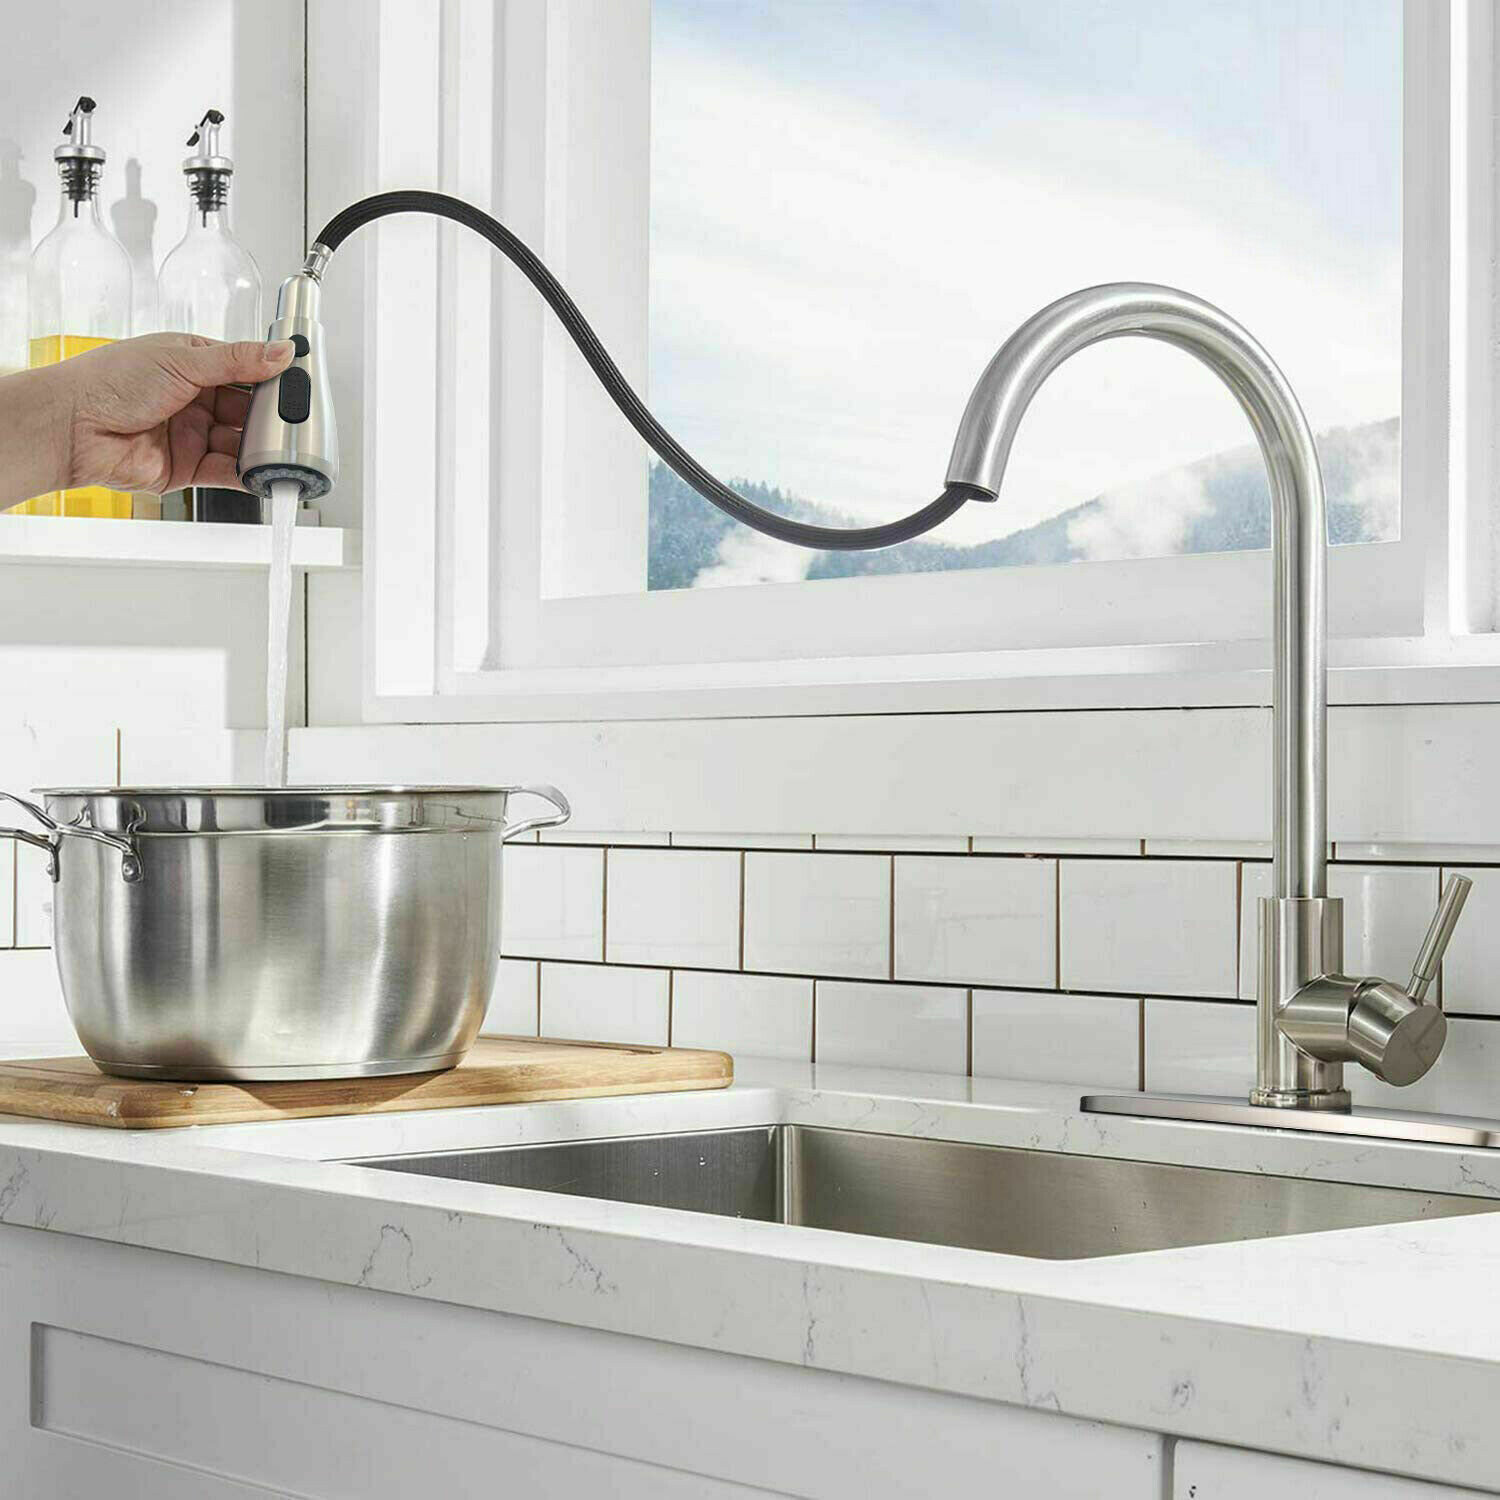 Image of Kitchen Faucet With Pull Down Sprayer Brushed Nickel High Arc Single Handle Stainless Steel Hot Cold Mixer Tap Commercia